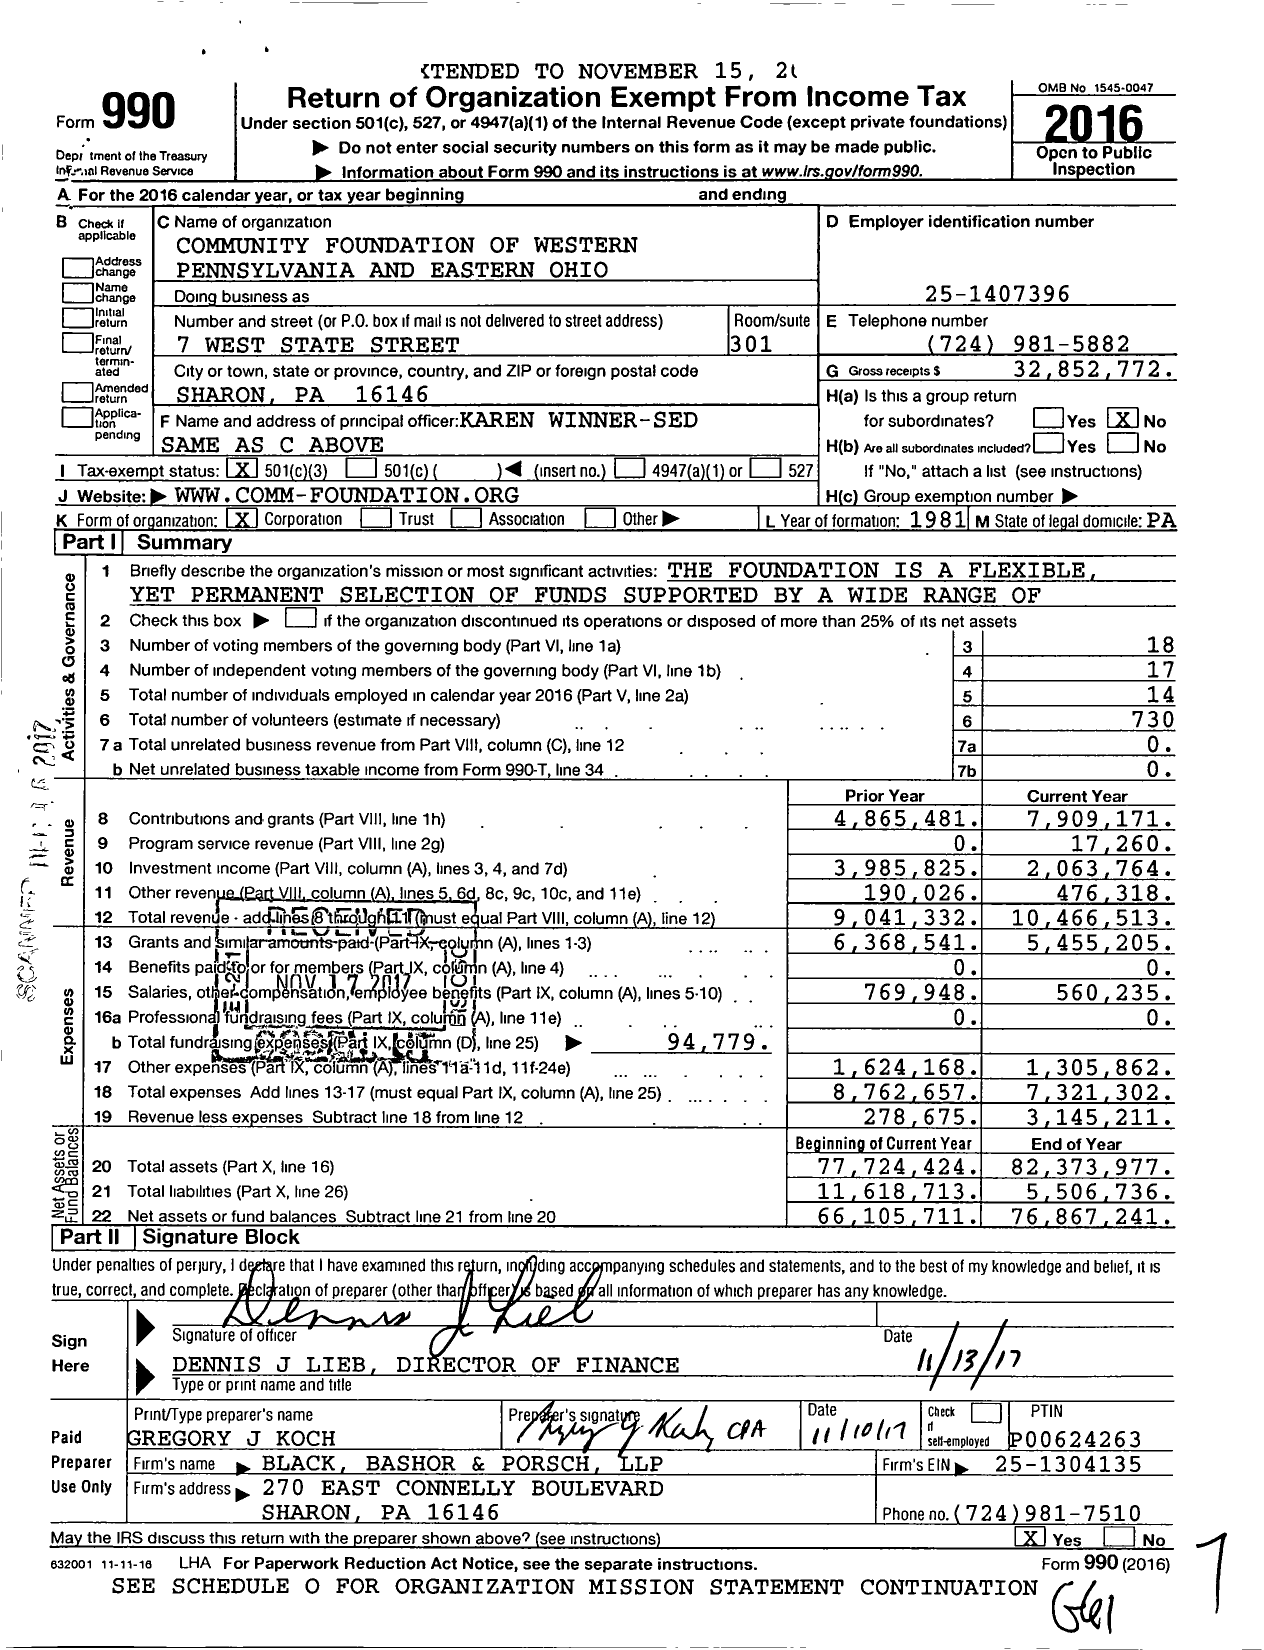 Image of first page of 2016 Form 990 for Community Foundation of Western Pennsylvania and Eastern Ohio